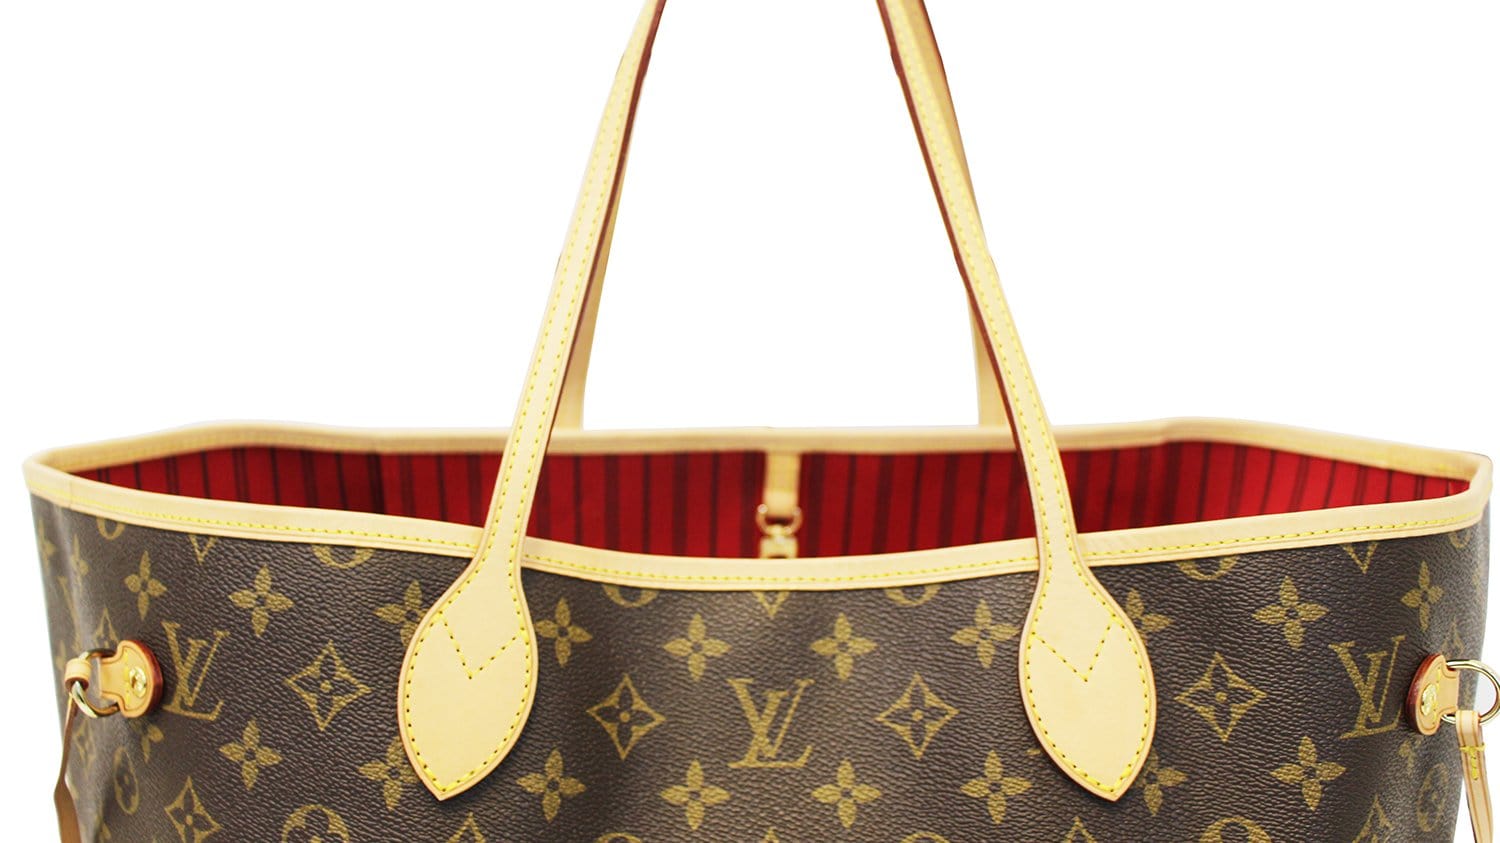 BAG NEW ARRIVAL - LV NEVERFULL BROWN AND RED GM 40CM M41180 – Sneakbag